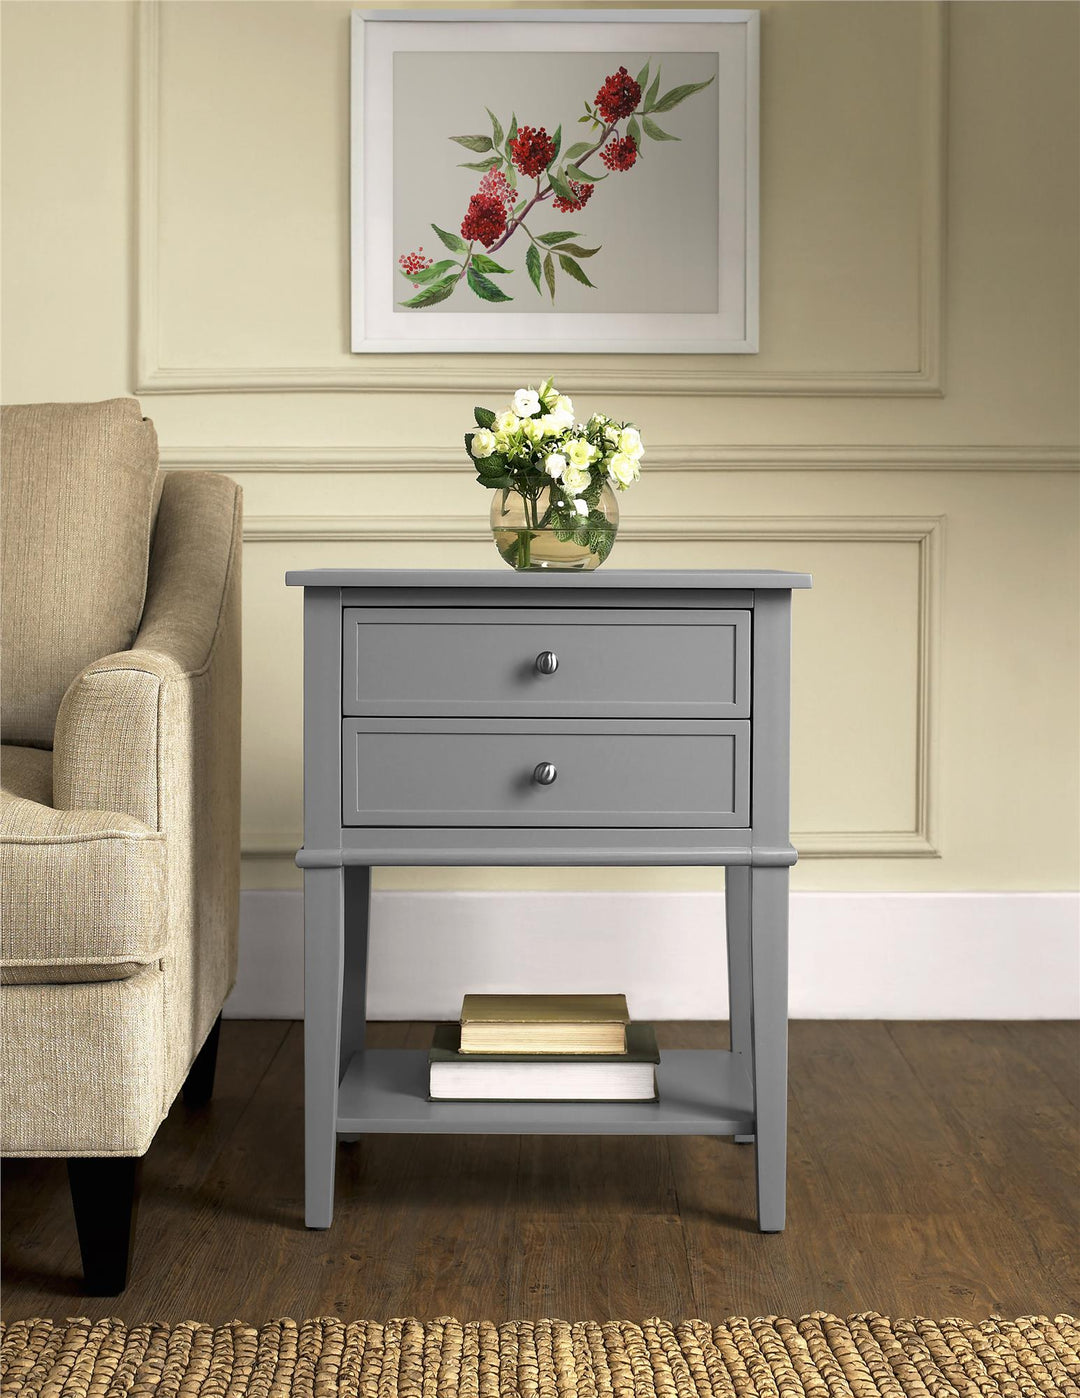 Franklin Accent Table with 2 Drawers - Gray